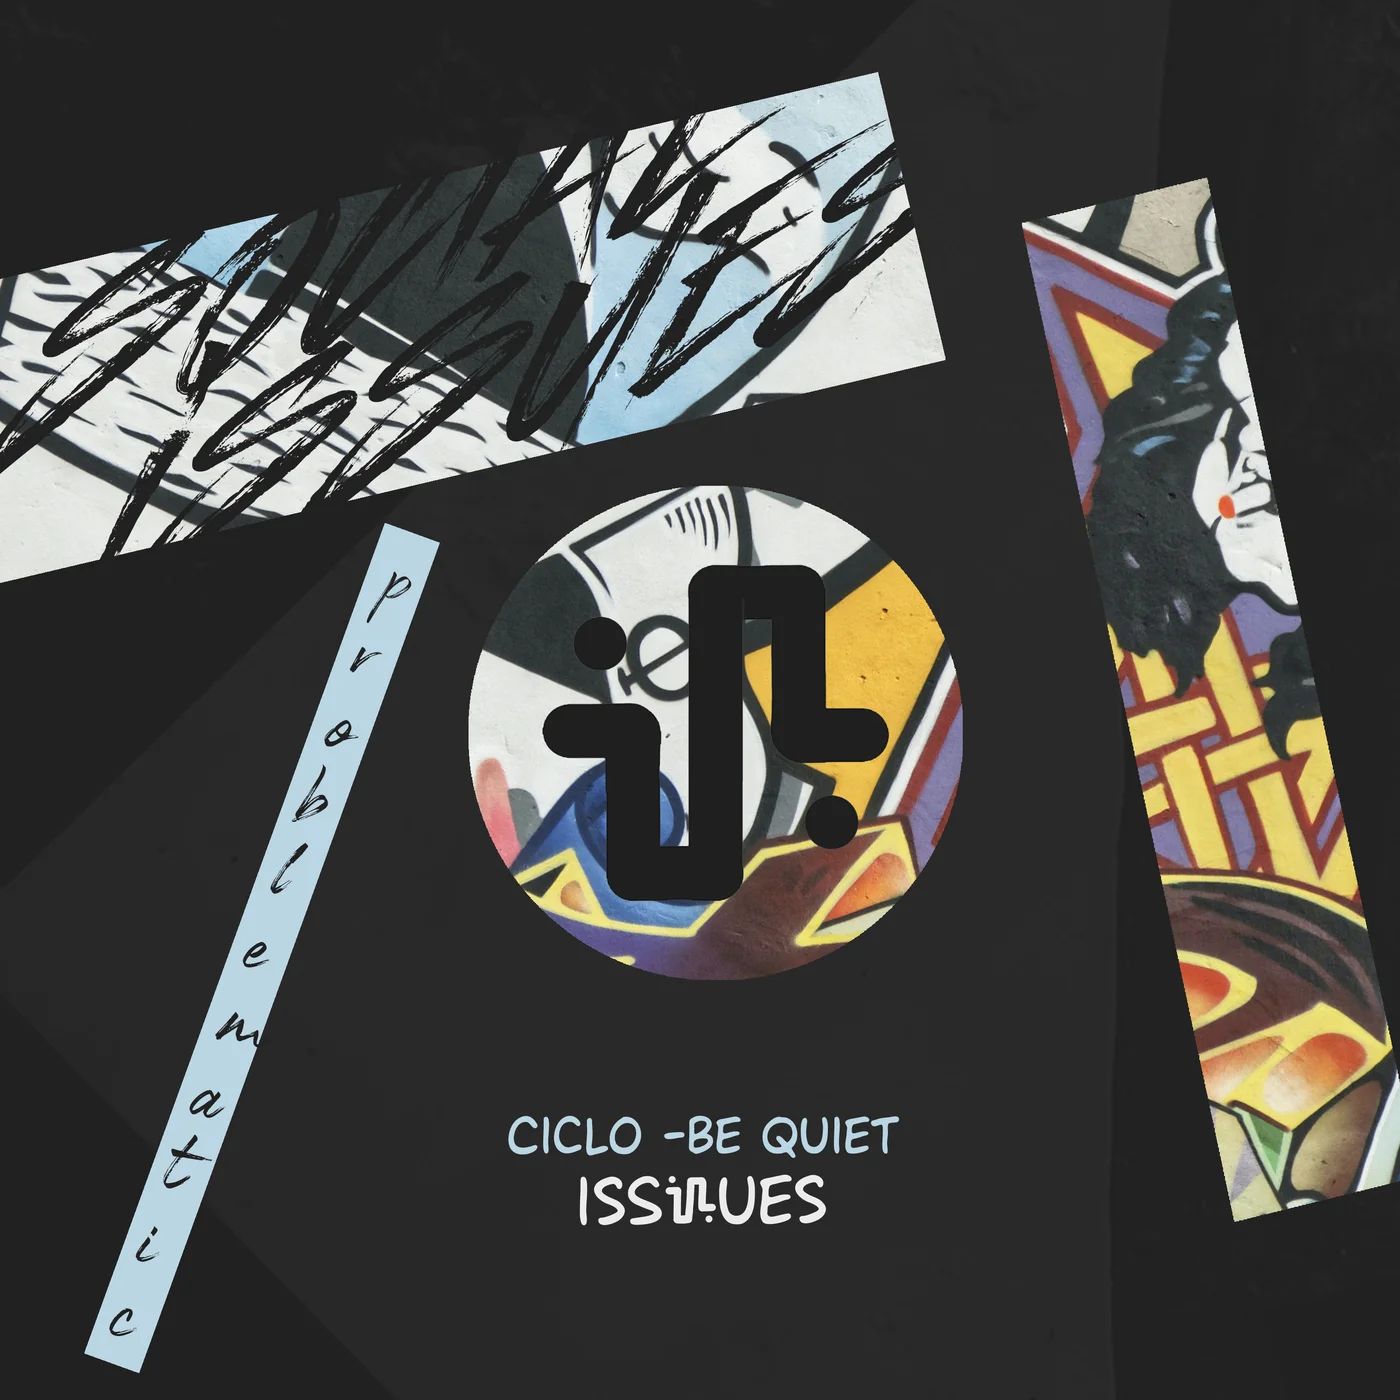 Ciclo - Be Quiet EP (ISSUES)